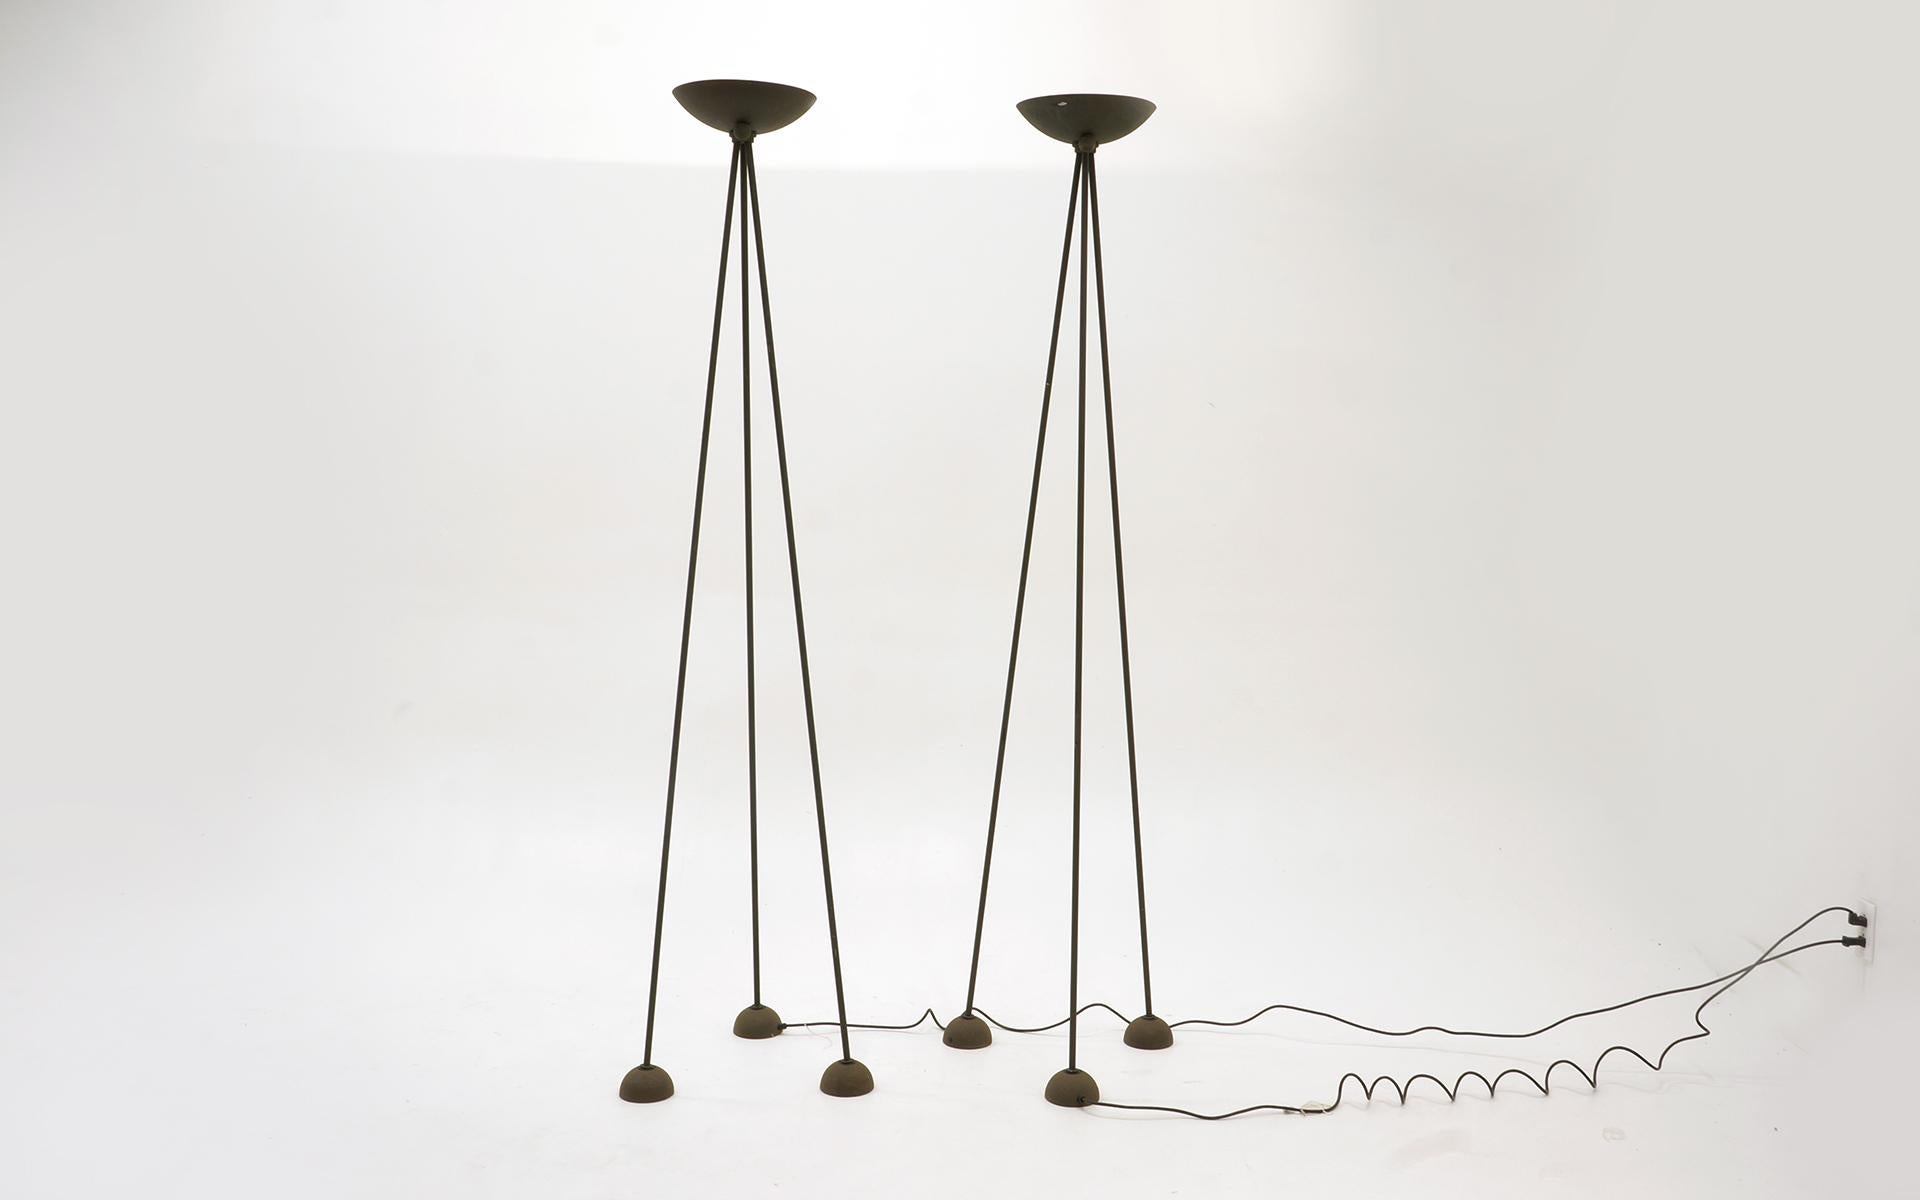 Pair of Postmodern Koch and Lowy floor lamps. Striking tripod design in the original textured black finish.